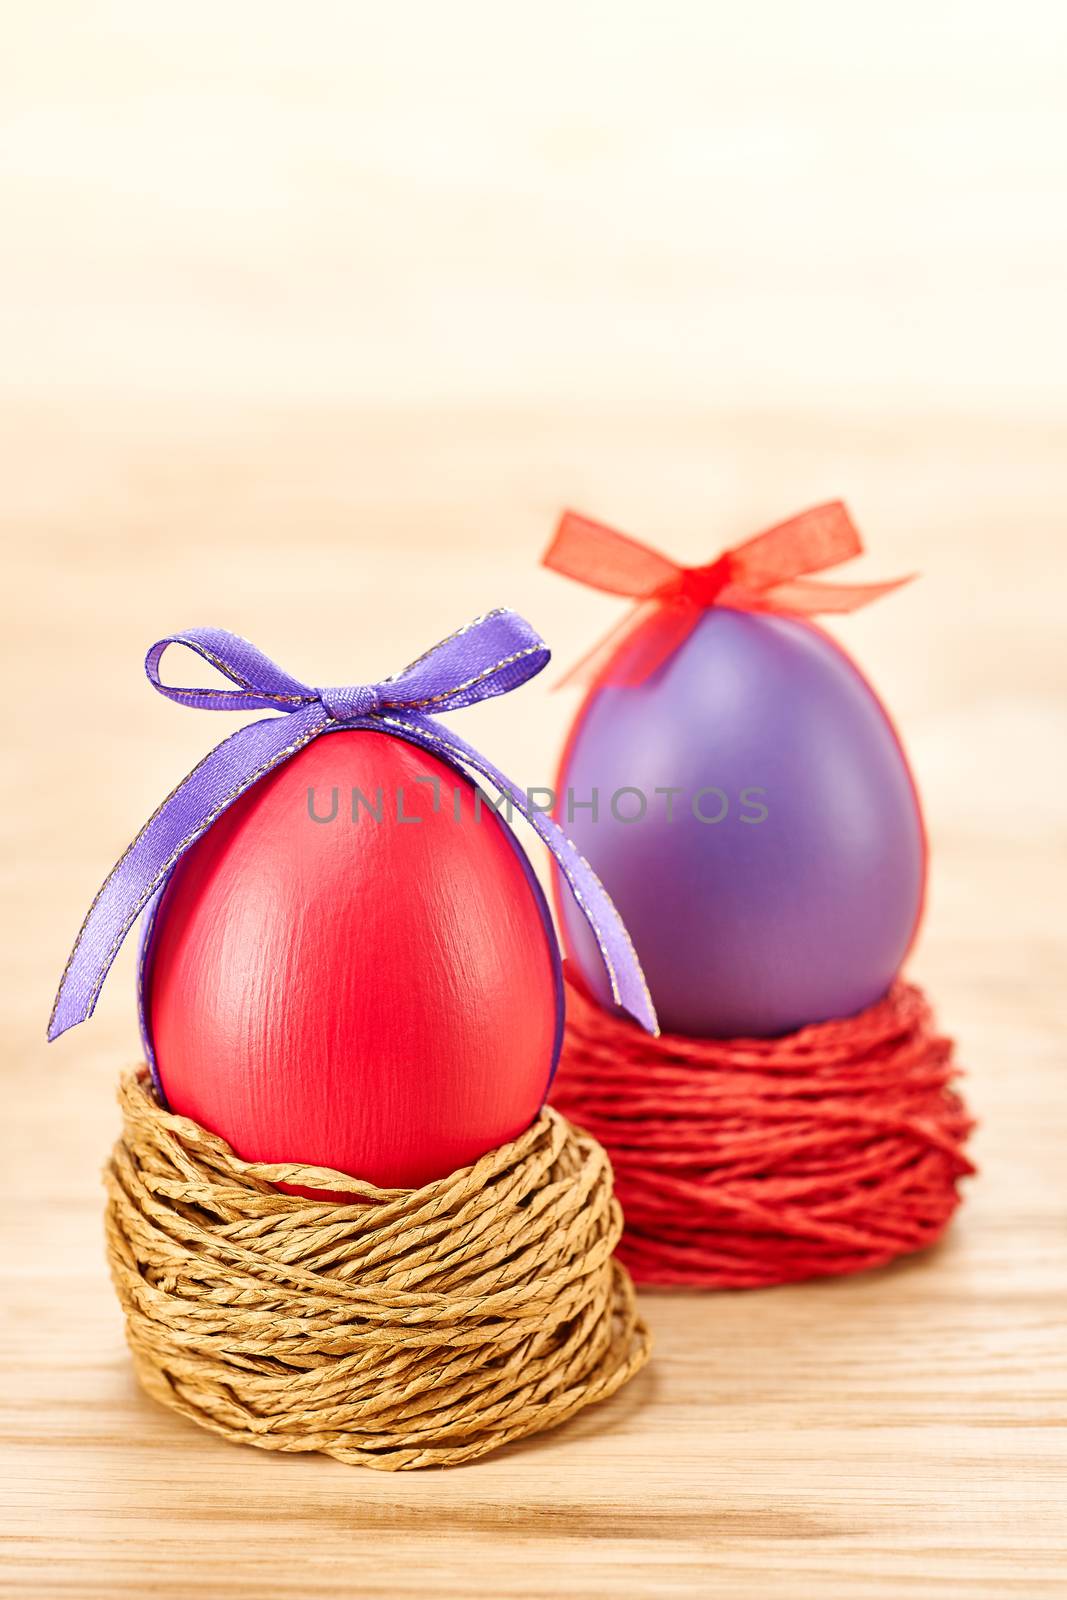 Easter eggs in nests. Hand painted decorated multicolored eggs with bow on wooden background. Unusual creative holiday greeting card 